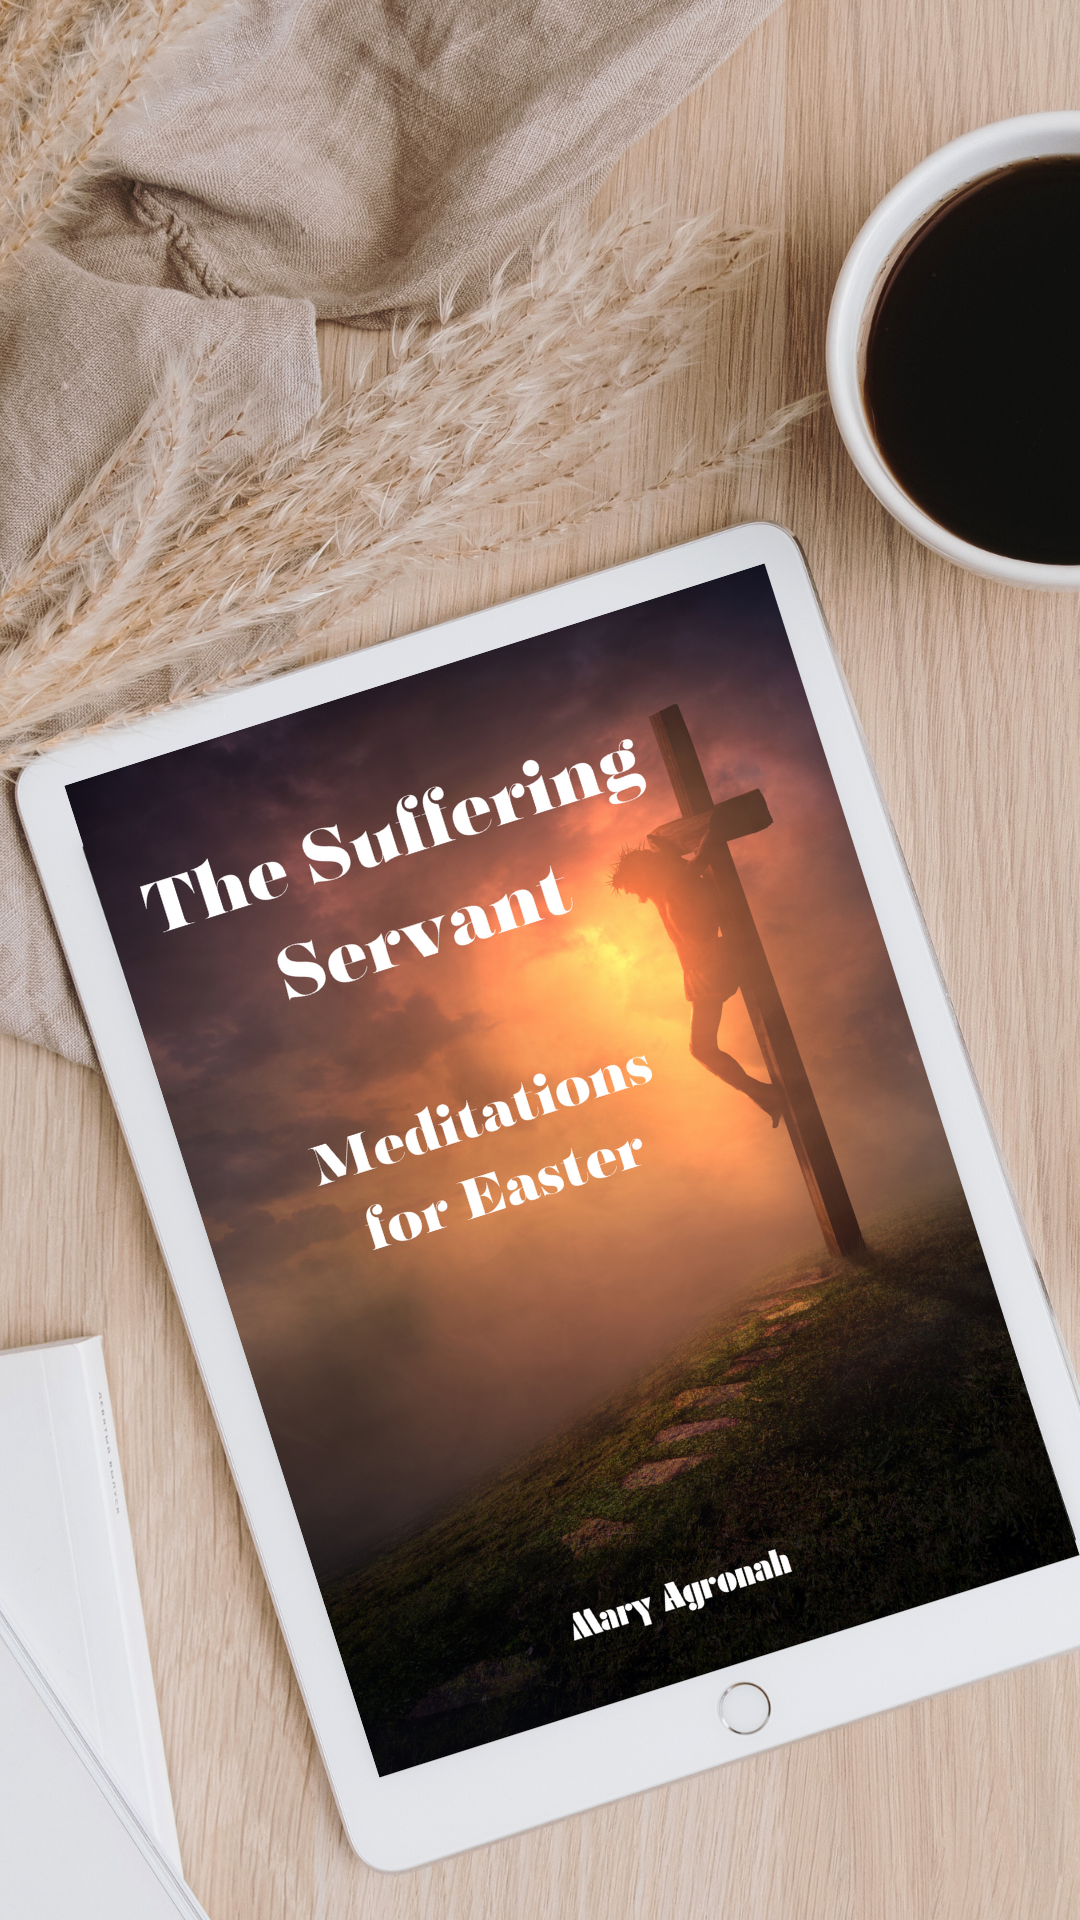 The Suffering Servant: Meditations for Easter (Free e-book)